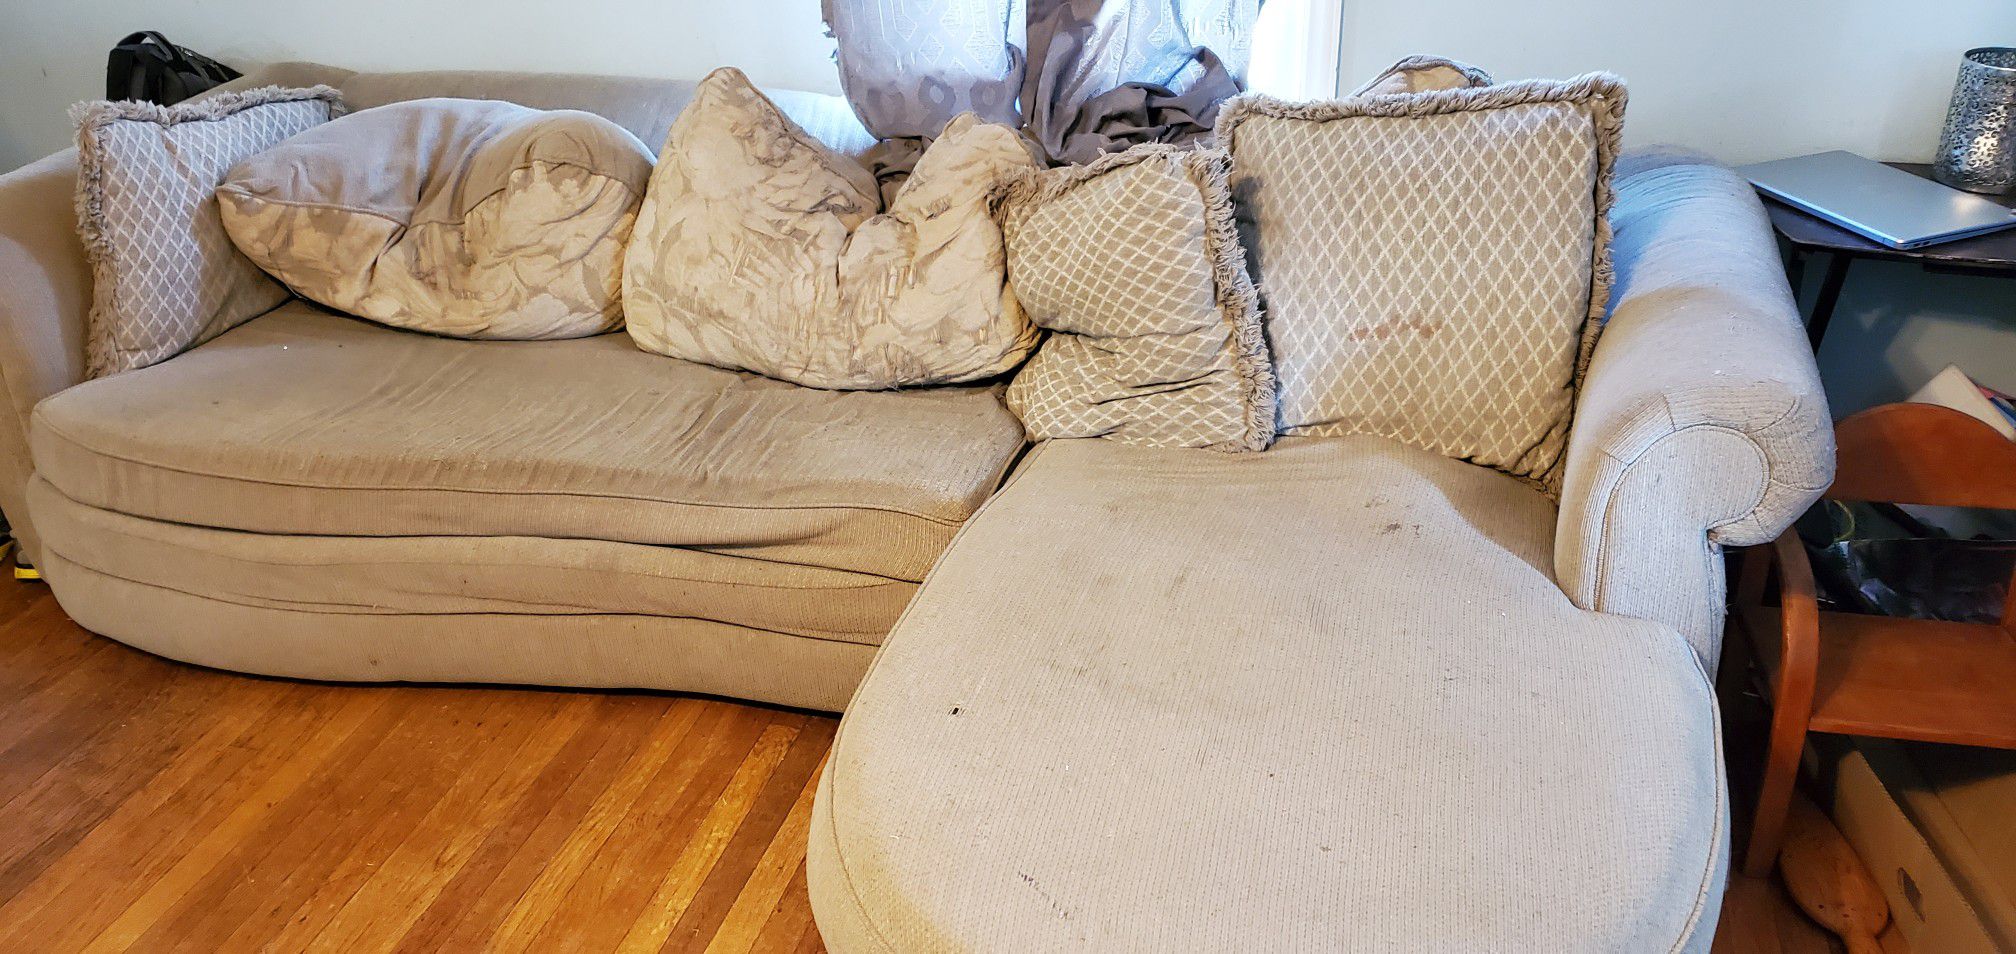 Free couch, curbside pickup.